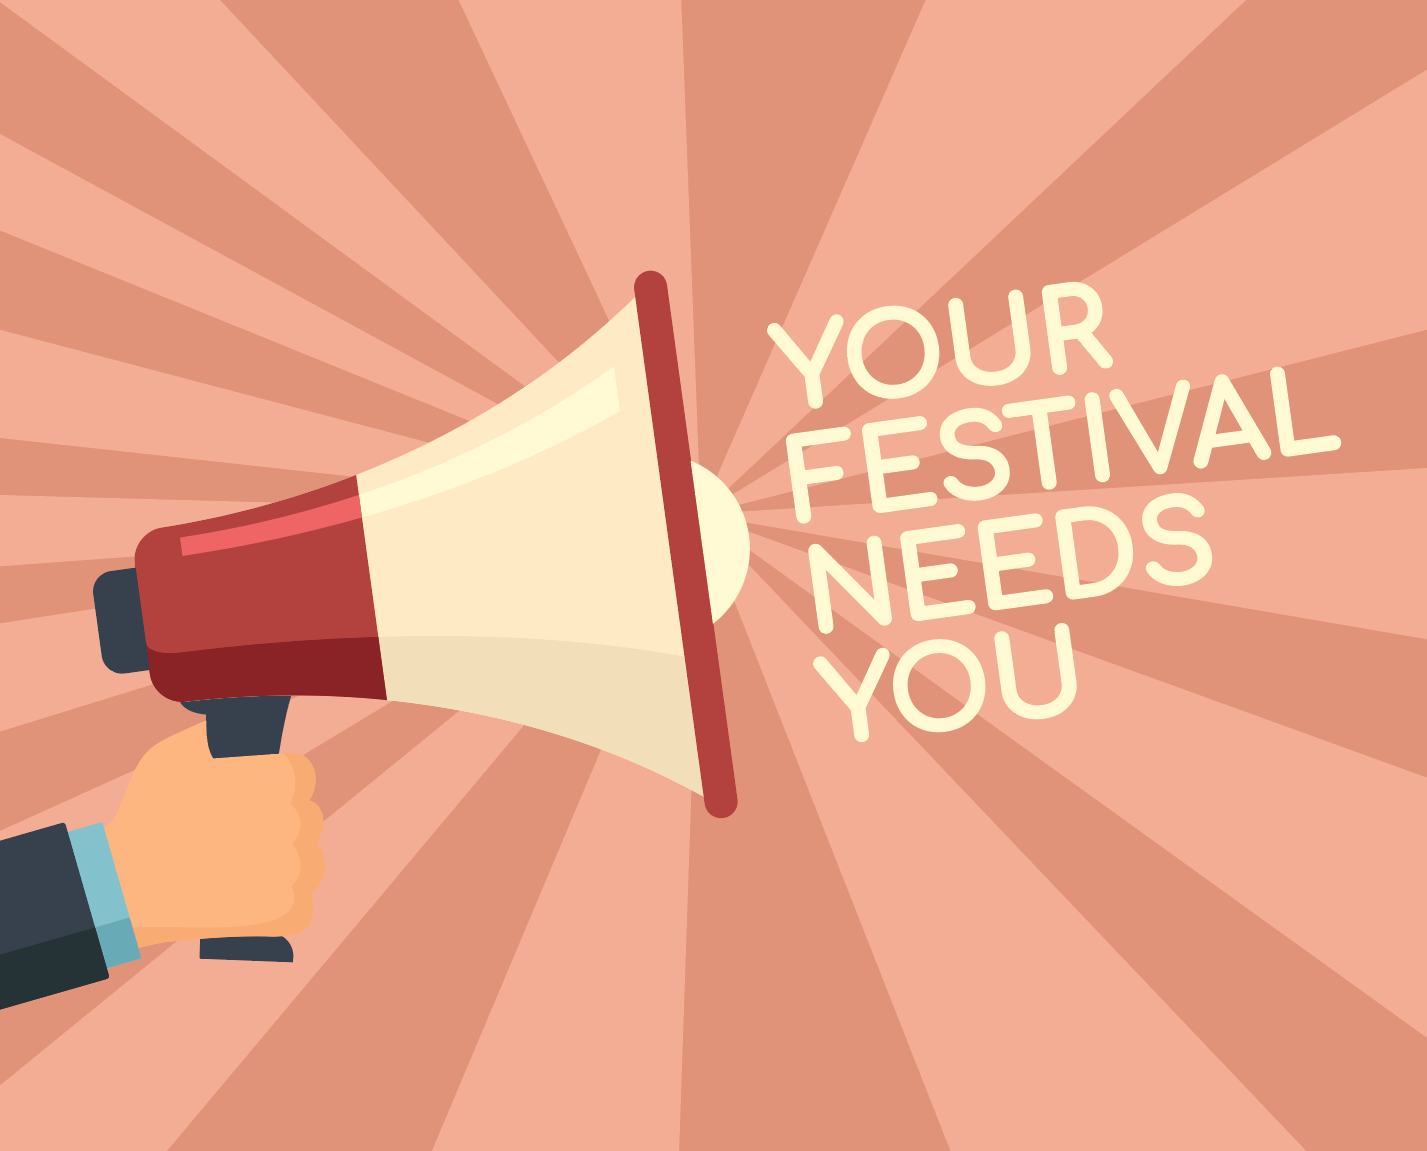 Your festival needs you